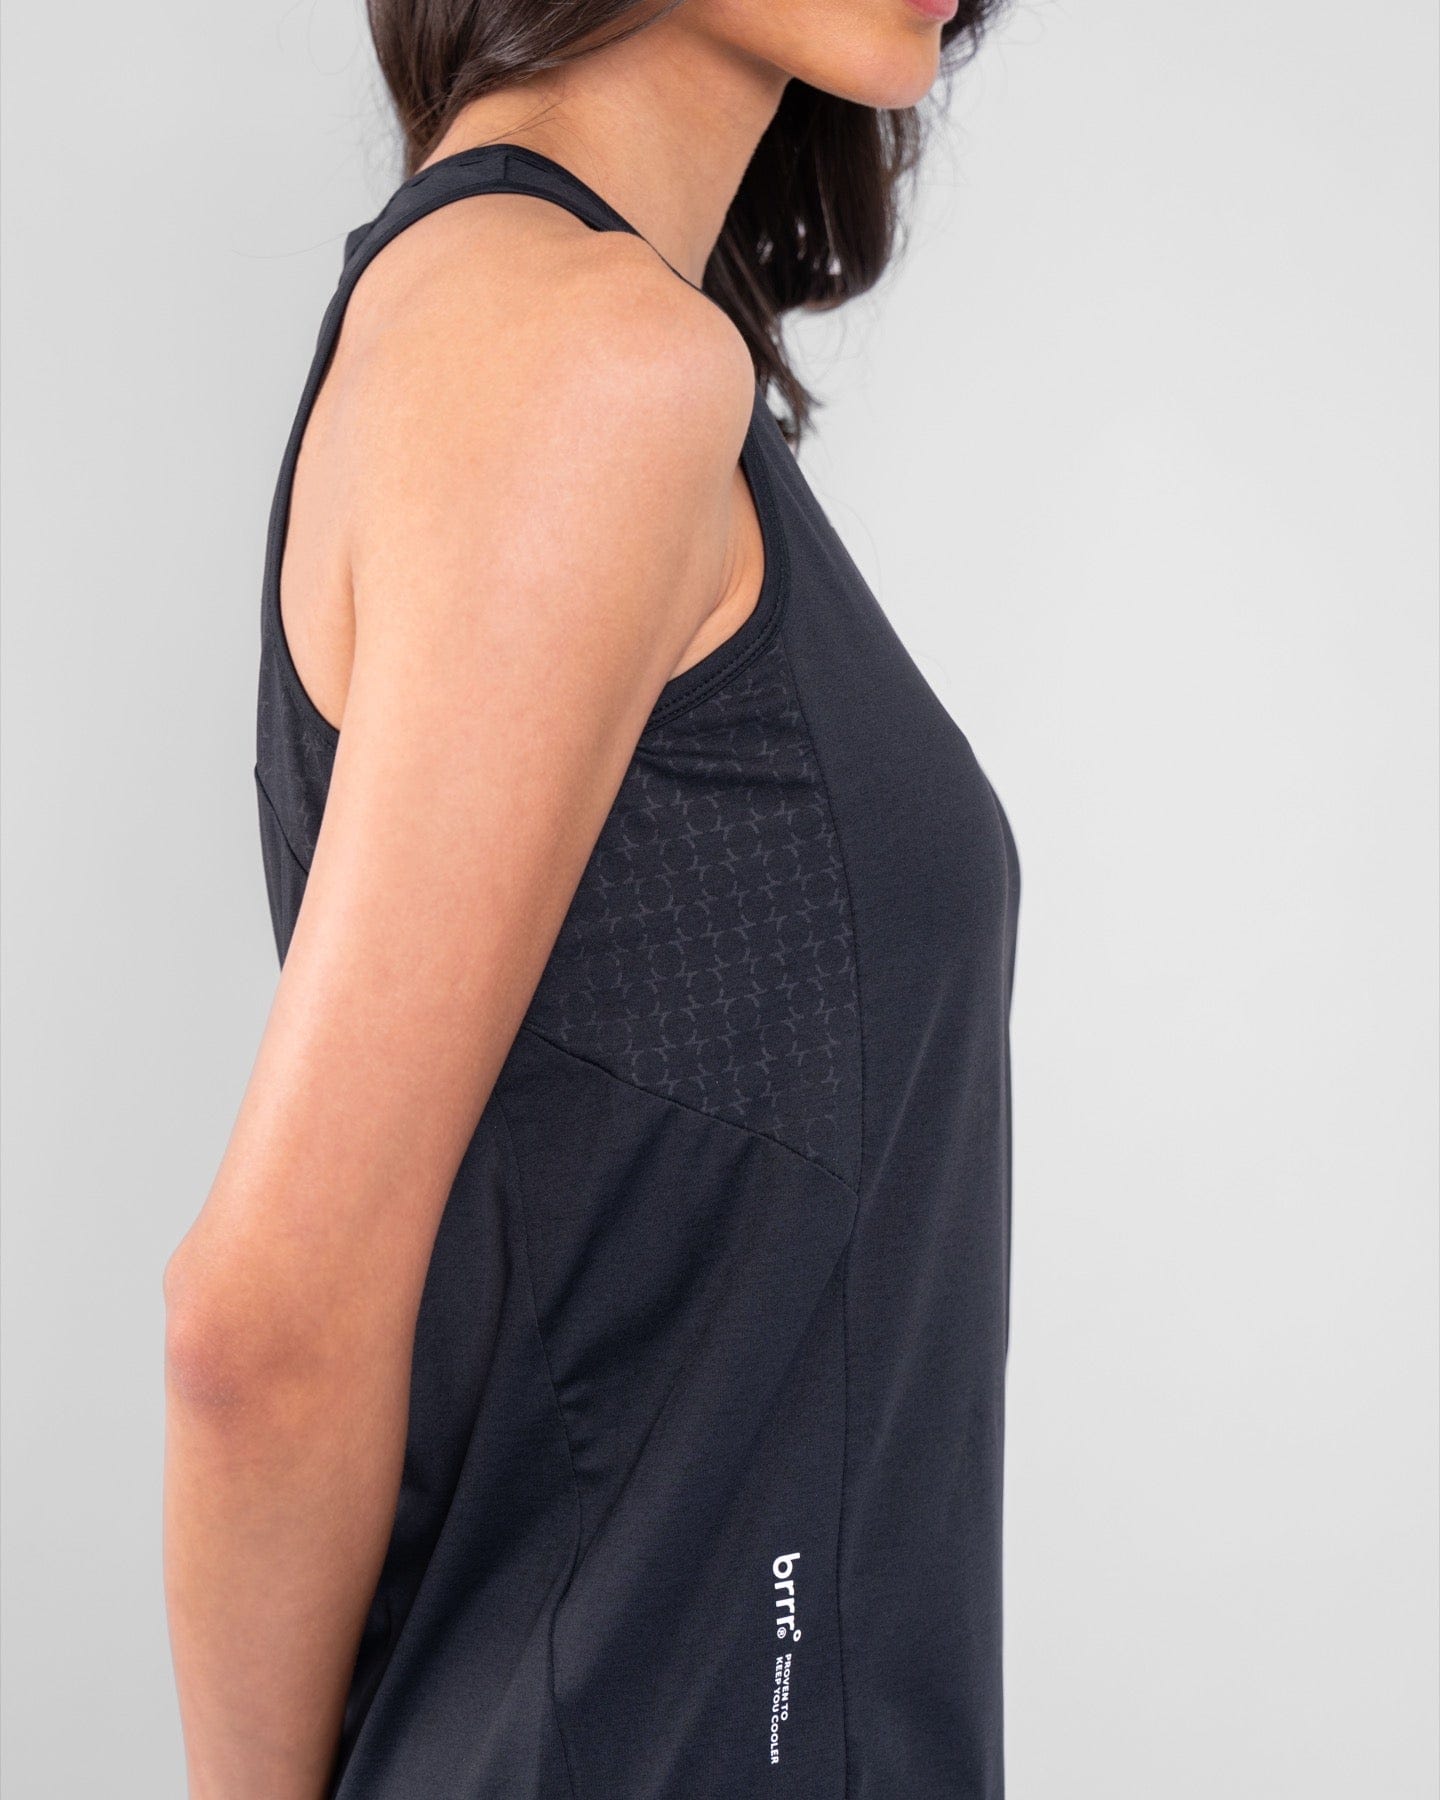 Woman showcasing the side and back details of a black RUH TANK TOP by qynda with a subtle patterned fabric, moisture resistance.